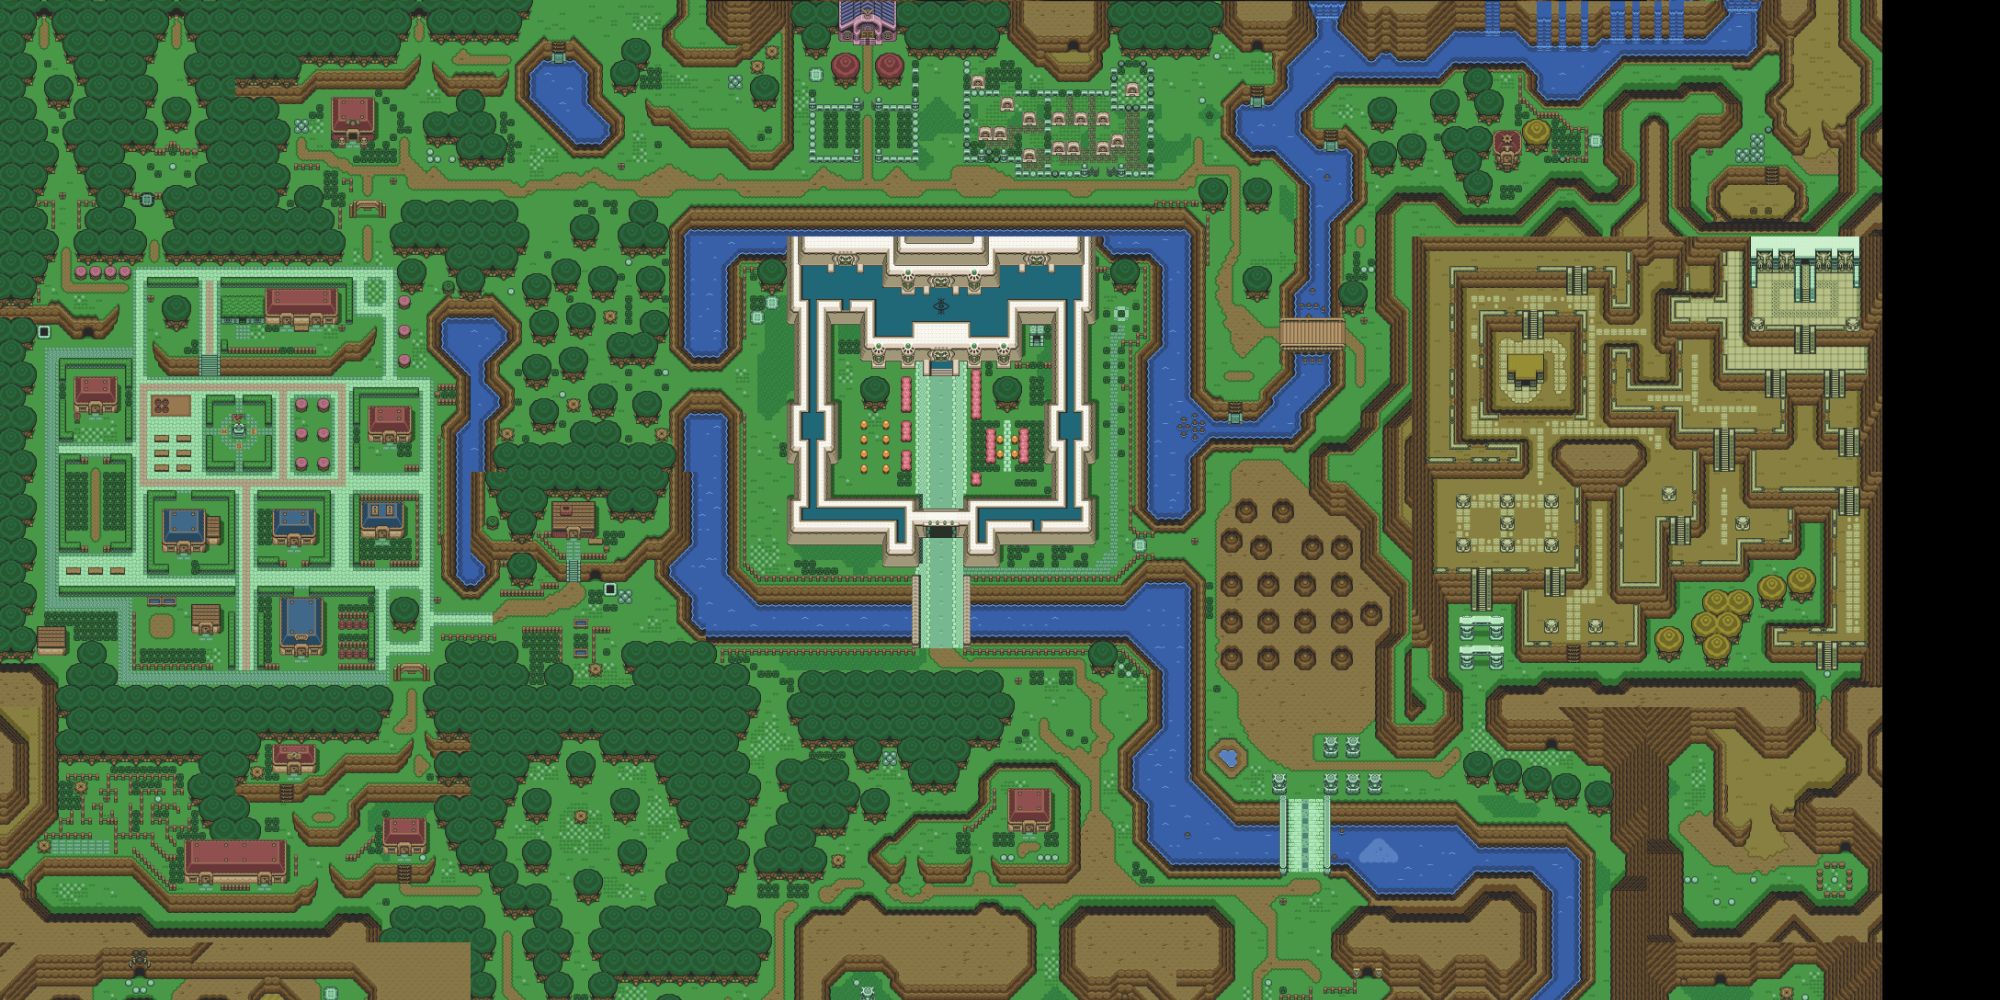 The overworld Light World map in A Link to the Past